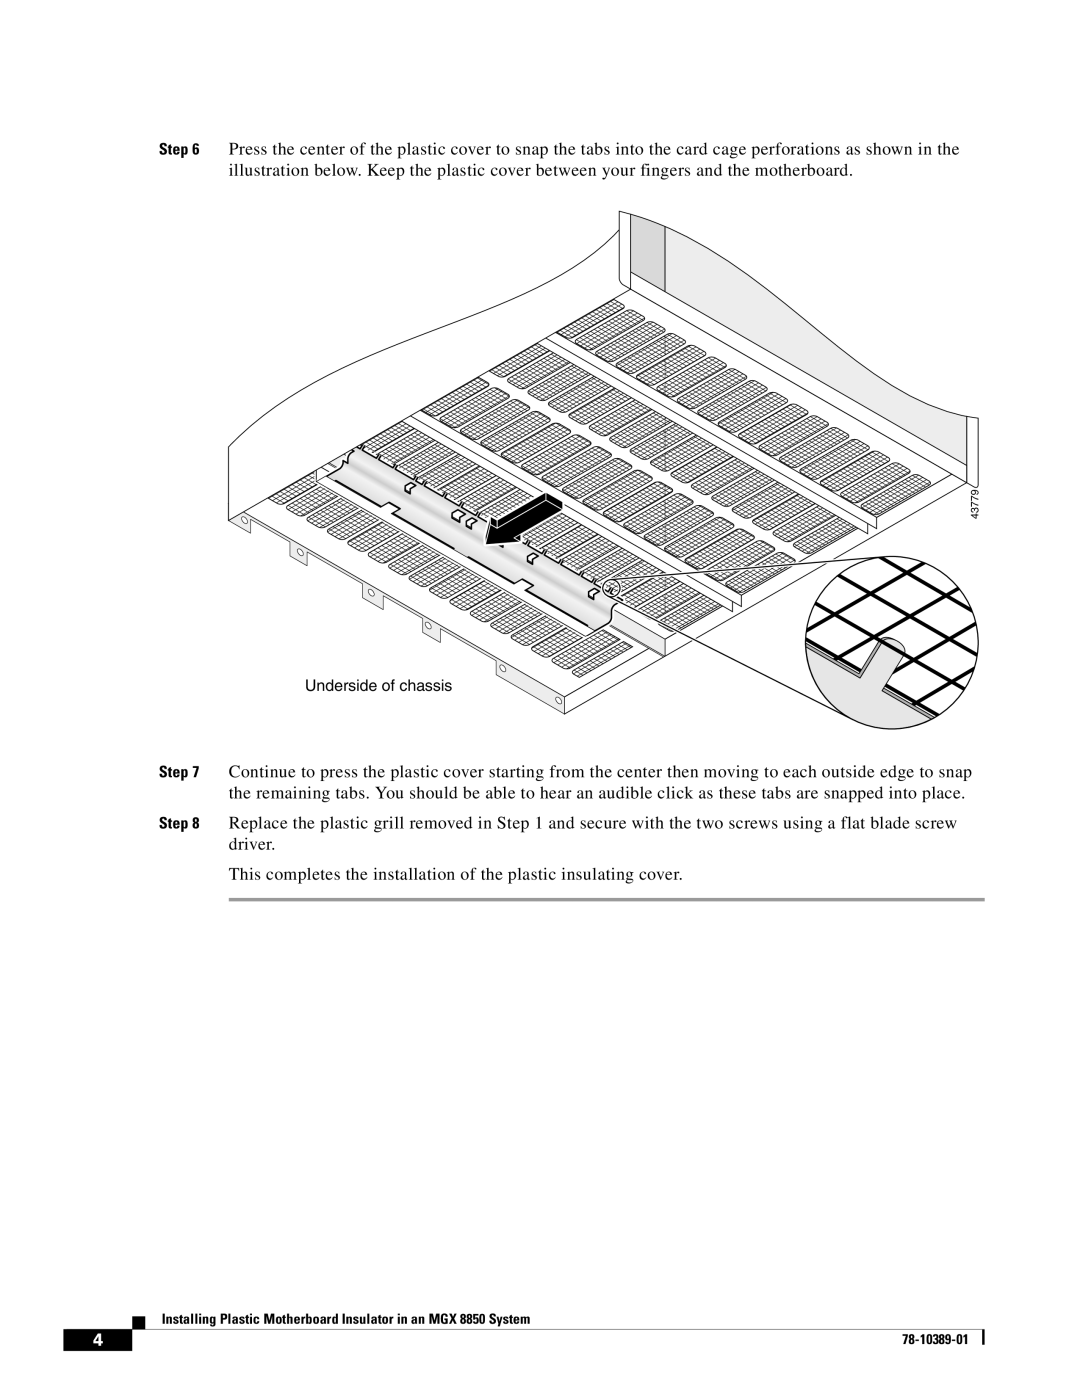 Cisco Systems MGX 8850 System manual This completes the installation of the plastic insulating cover 